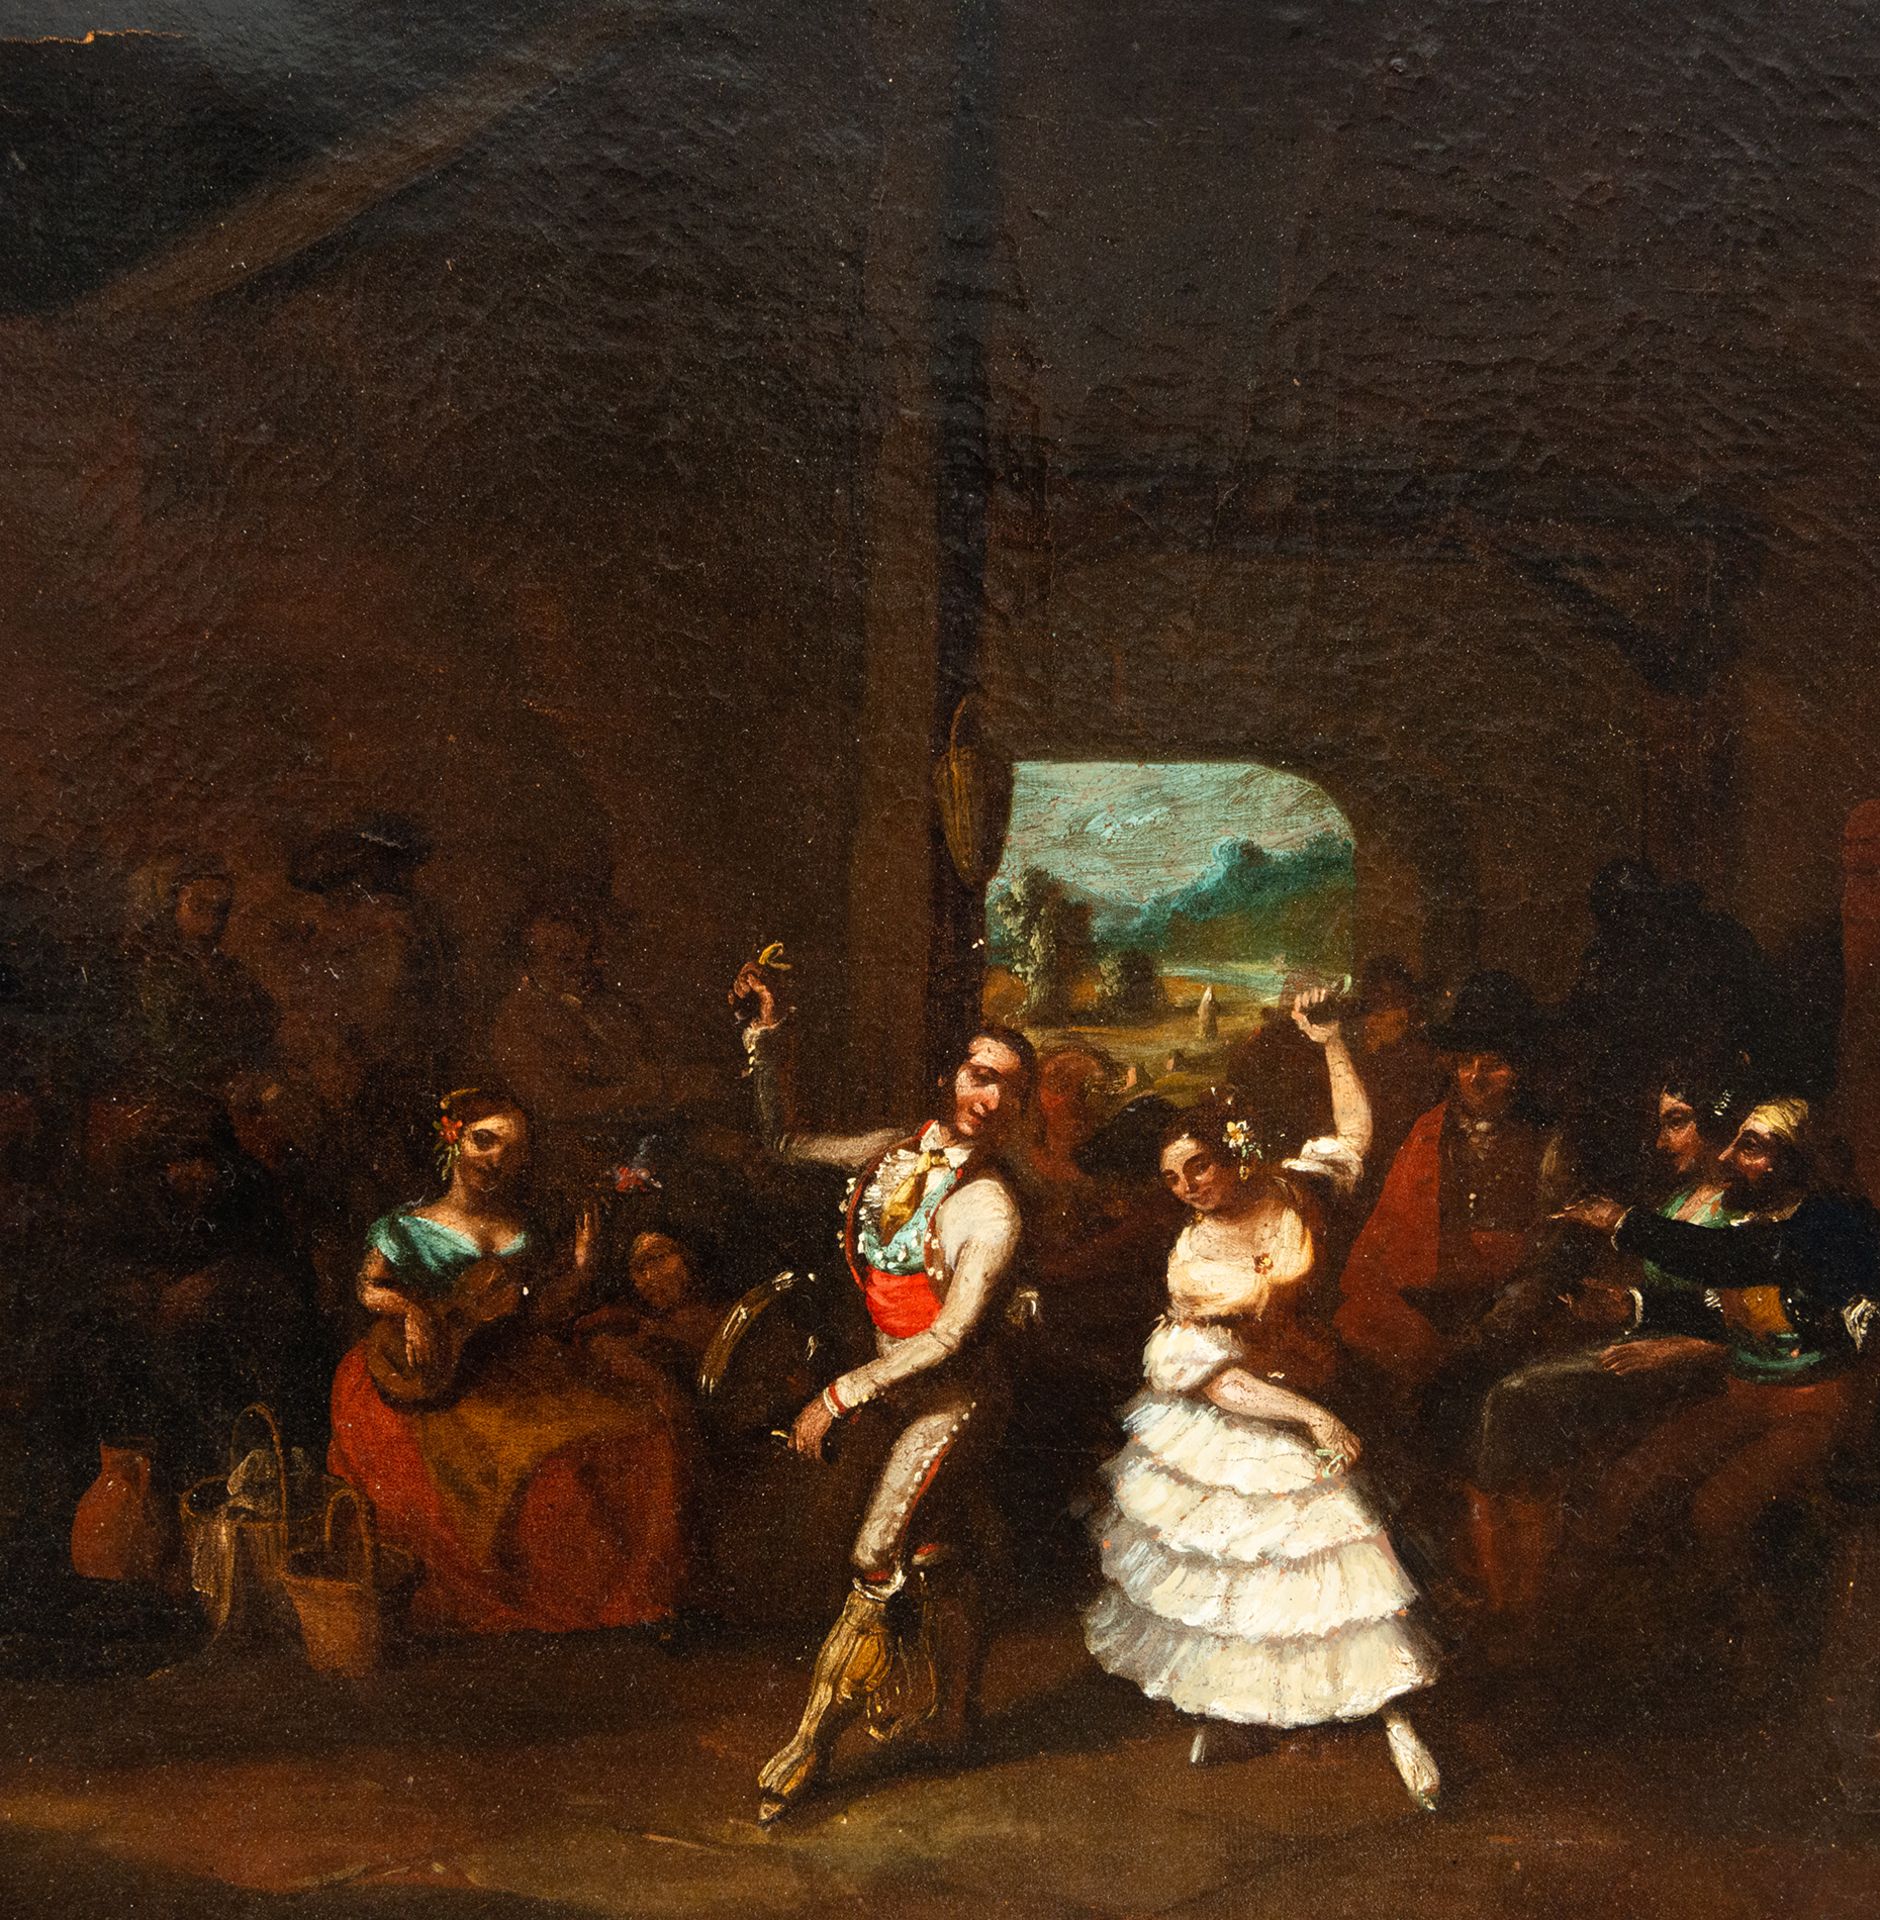 Flamenco party, Spanish manners school from the end of the 18th century - Image 2 of 4